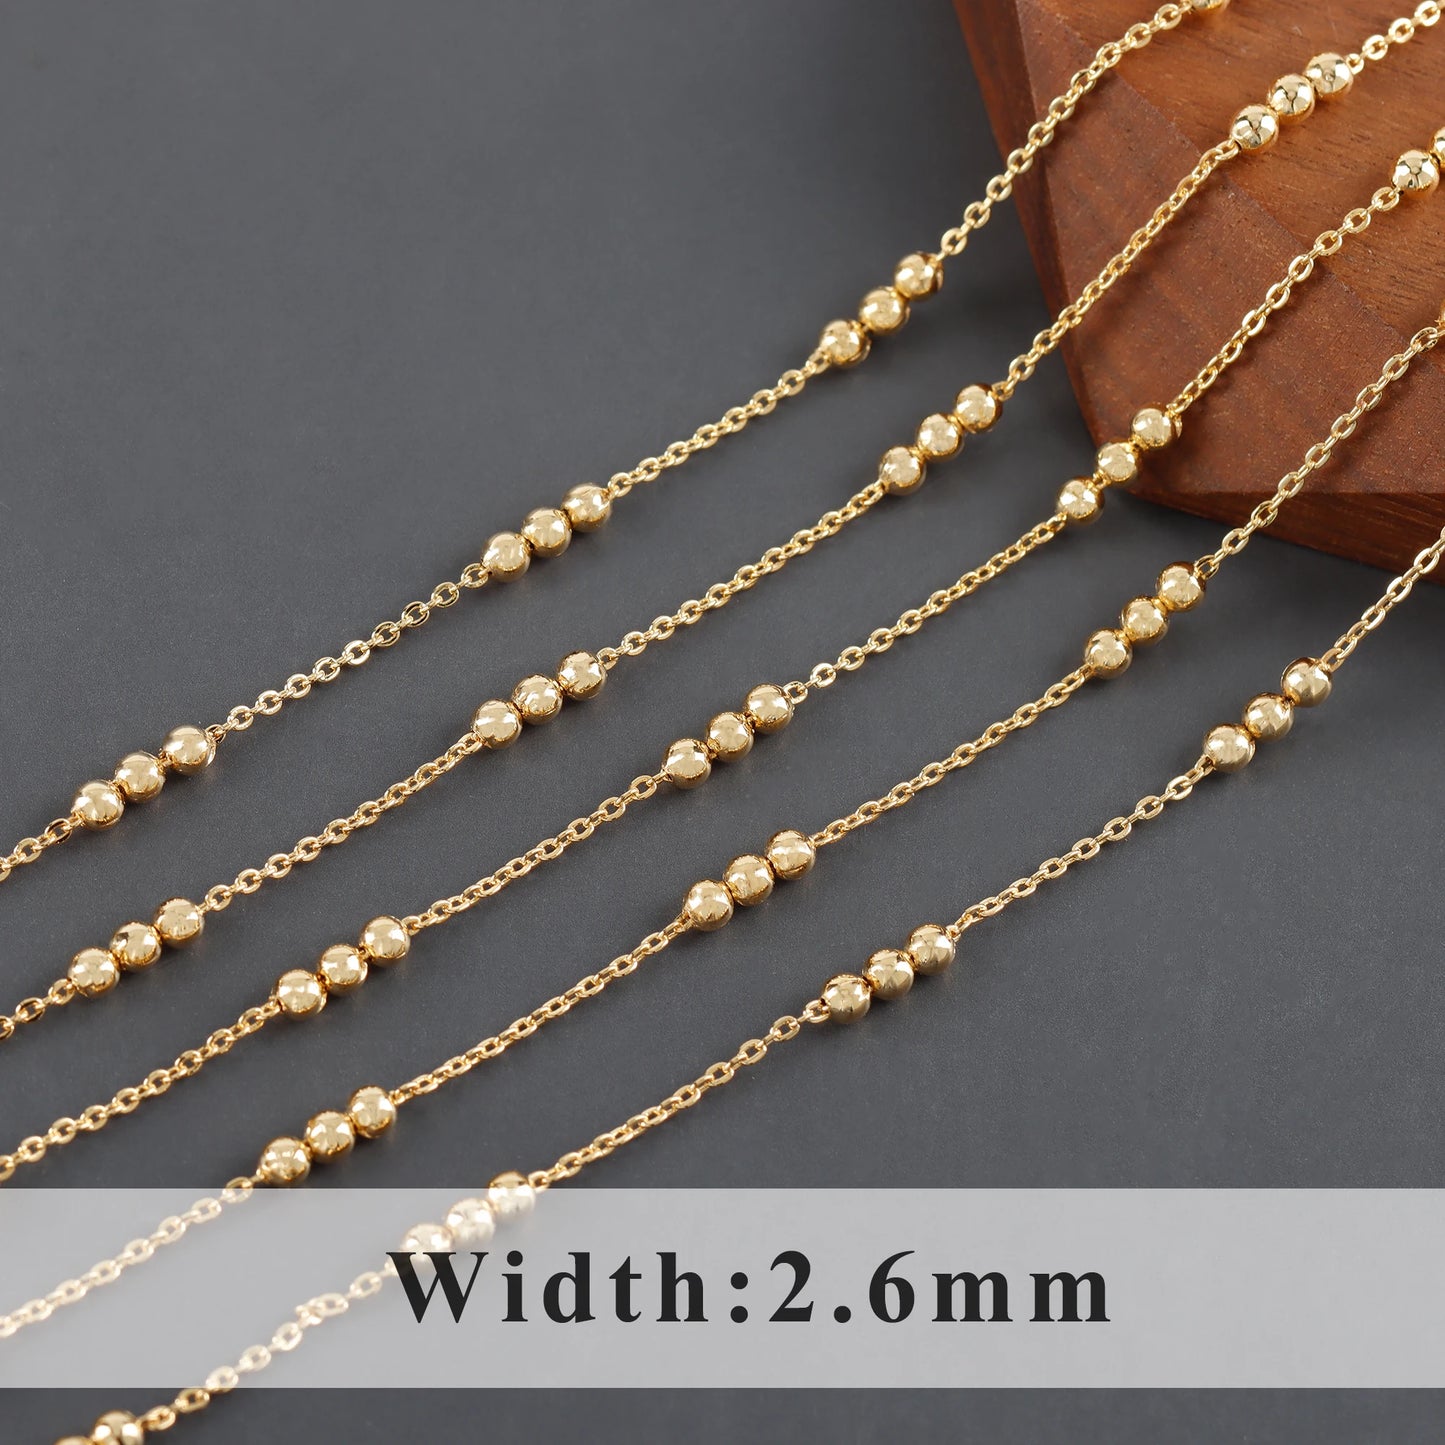 GUFEATHER C237,diy chain,pass REACH,nickel free,18k gold rhodium plated,copper,plastic pearl,diy necklace,jewelry making,1m/lot